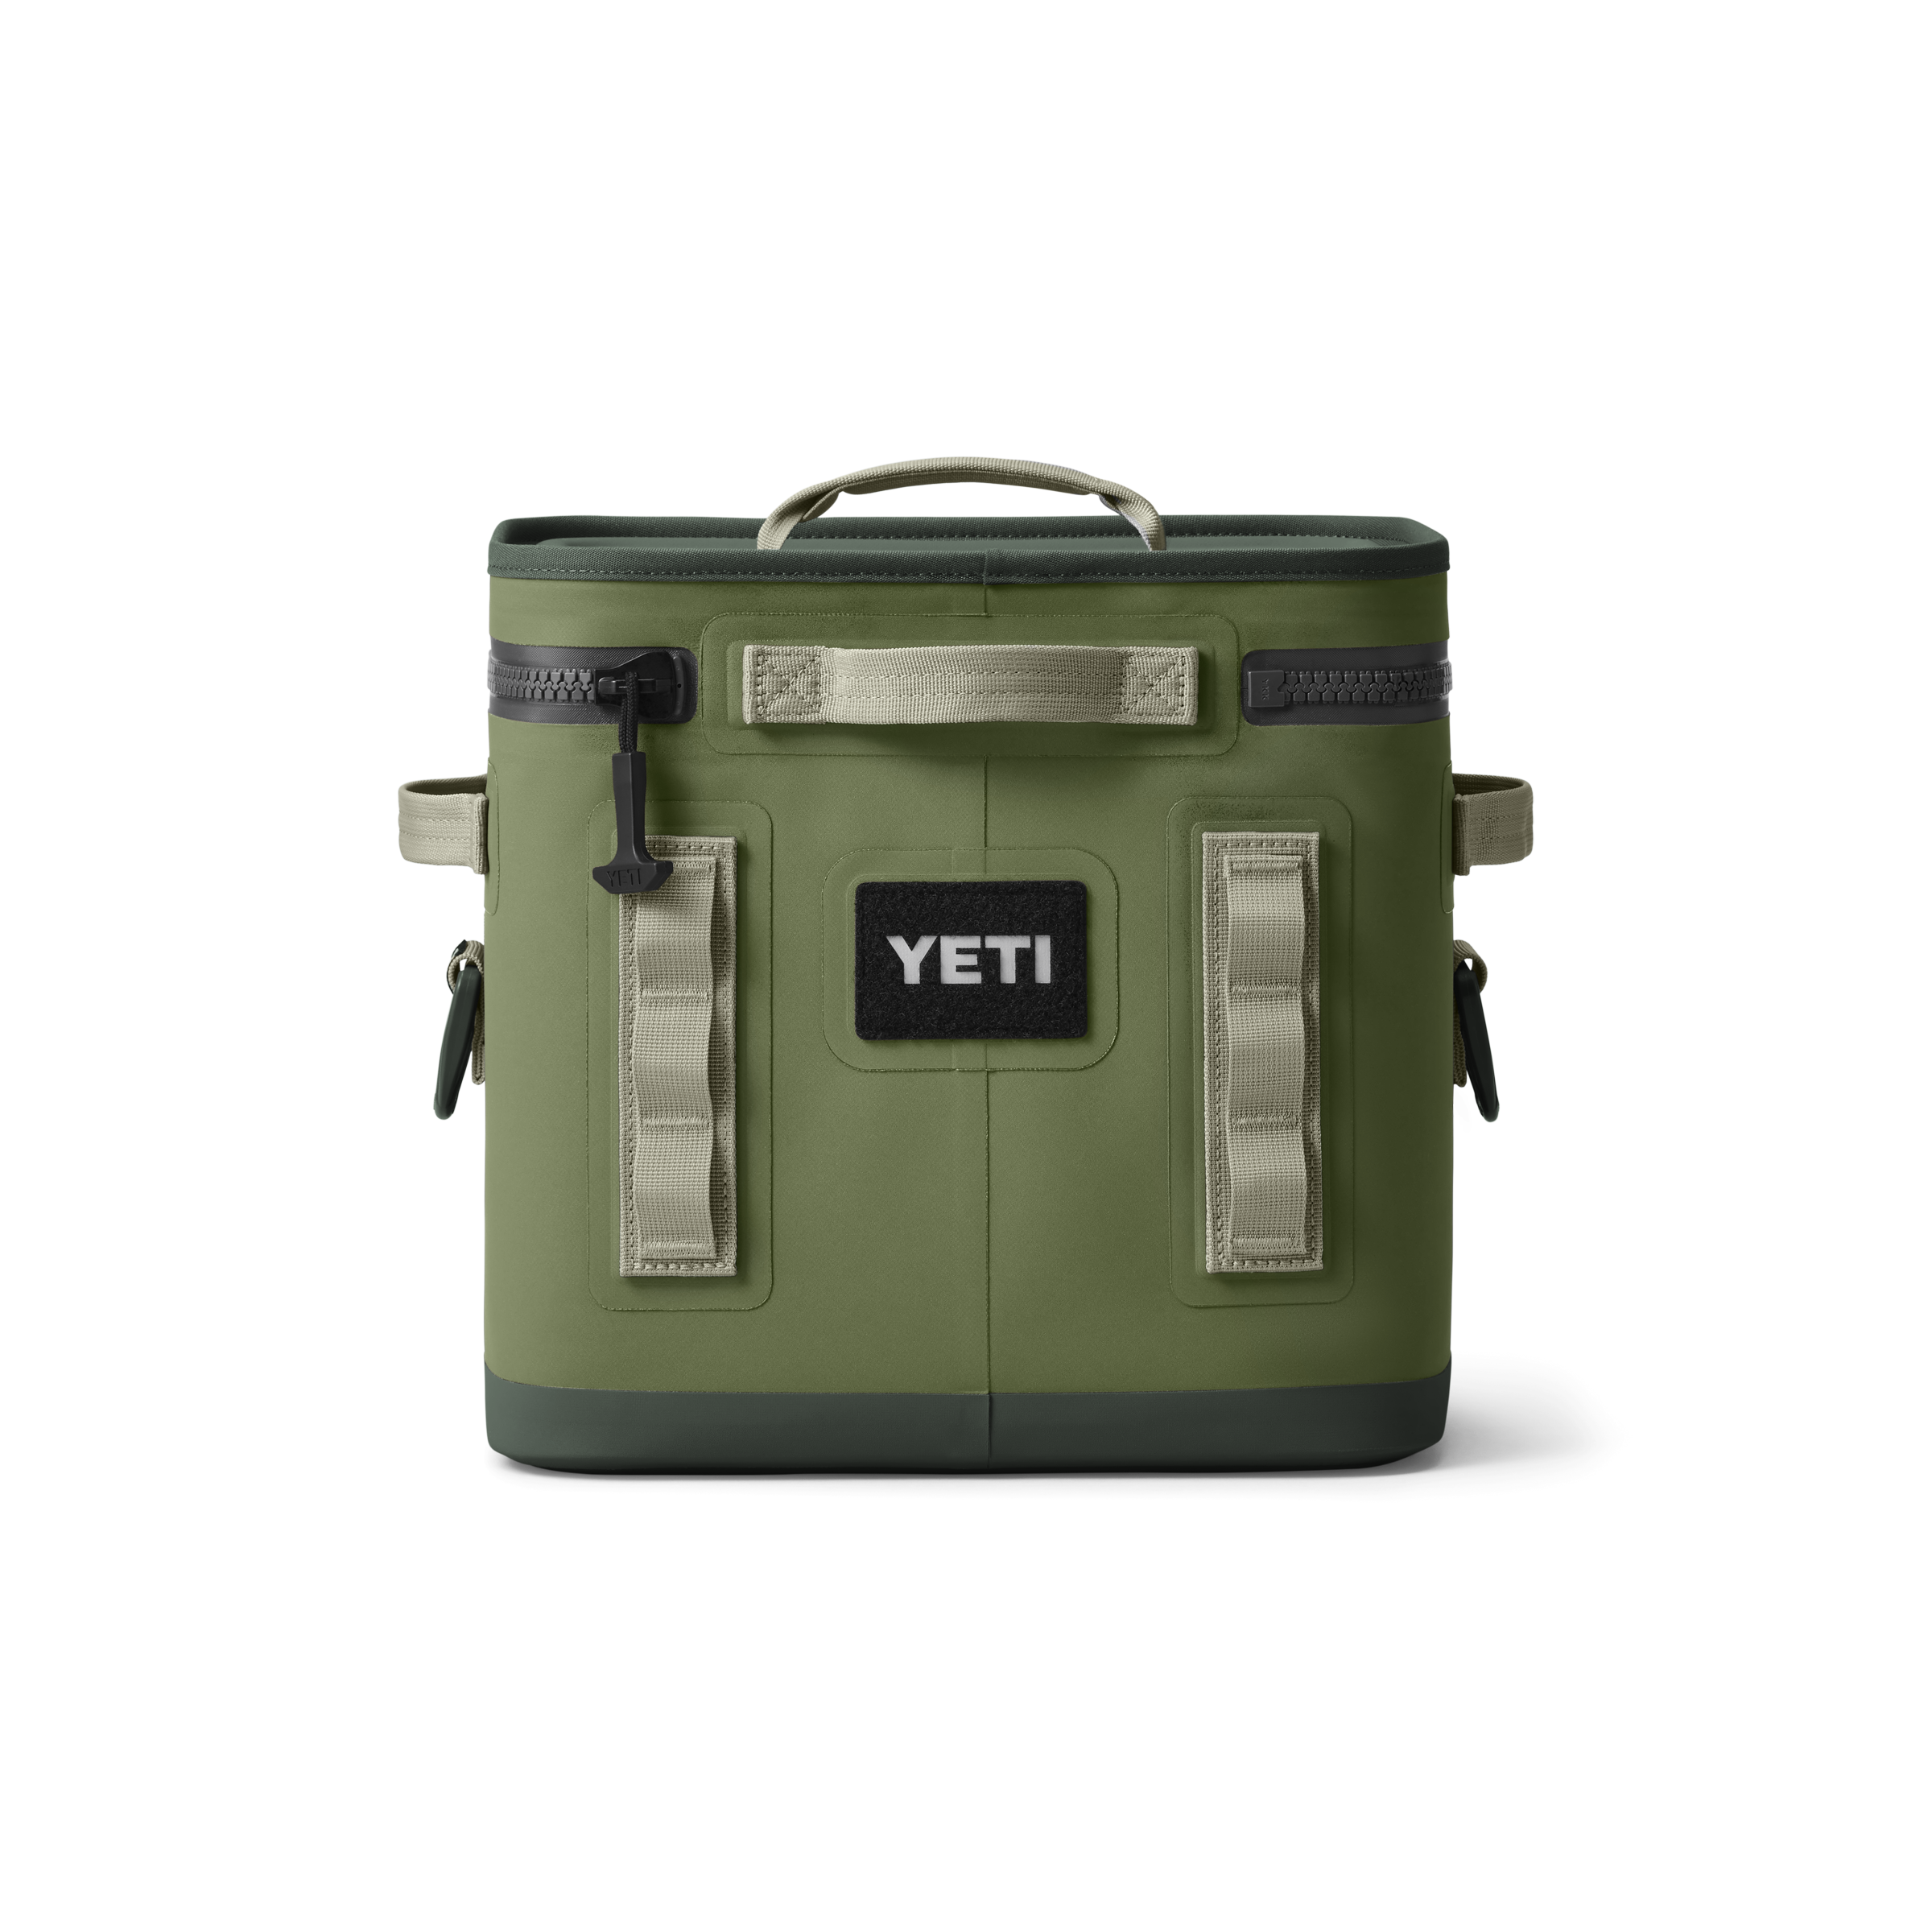 Review] The Hopper Flip 12 by Yeti – Adventure Rig